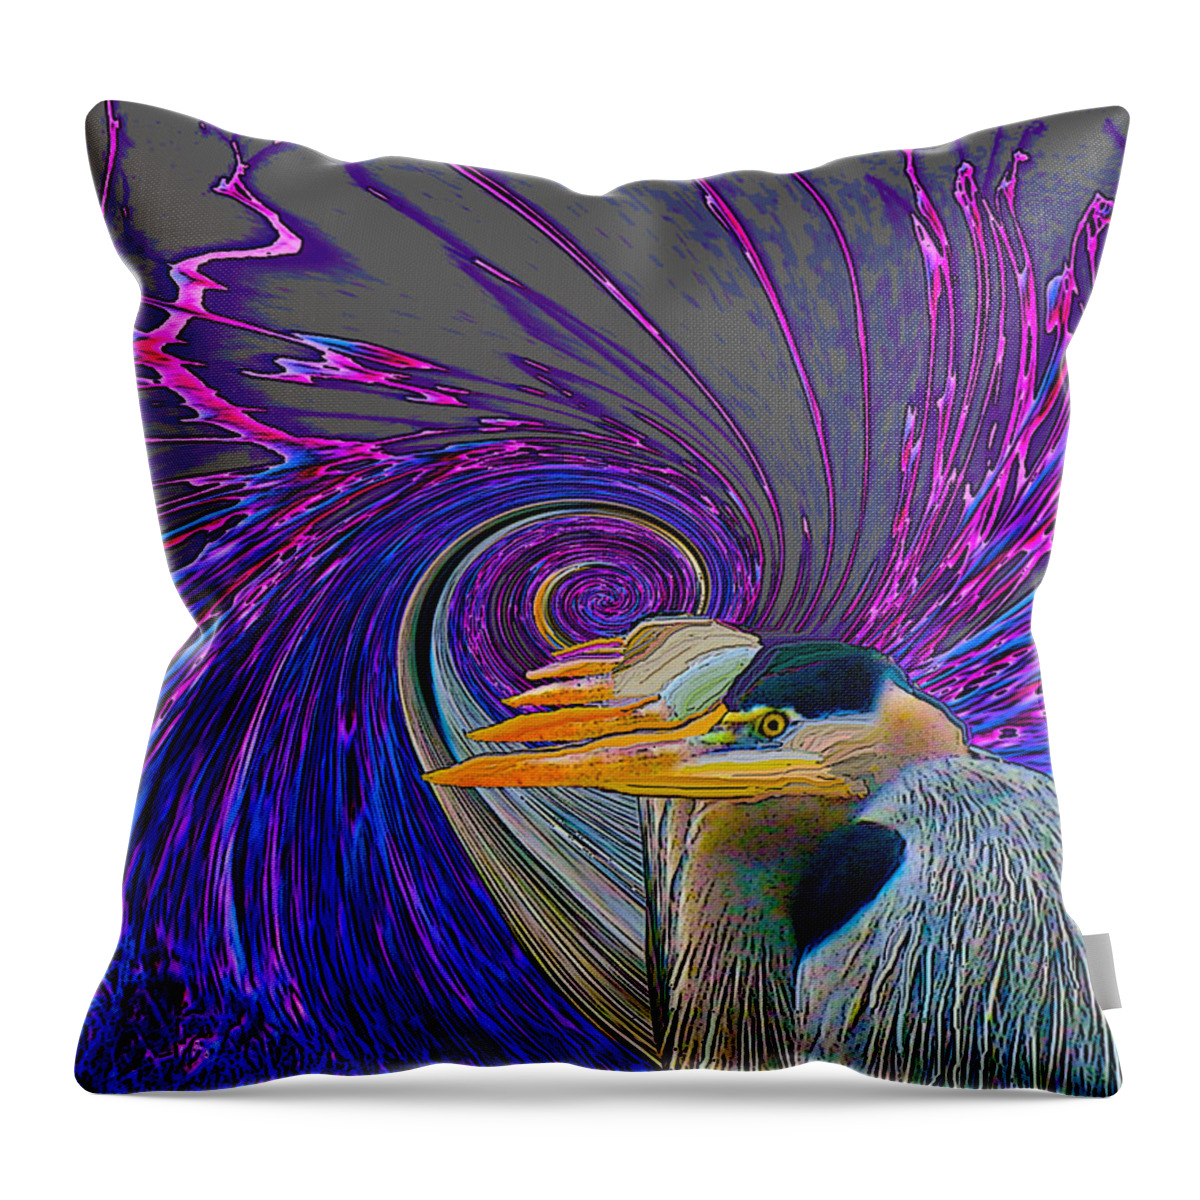 Contemporary Throw Pillow featuring the digital art In The Zone by Phillip Mossbarger